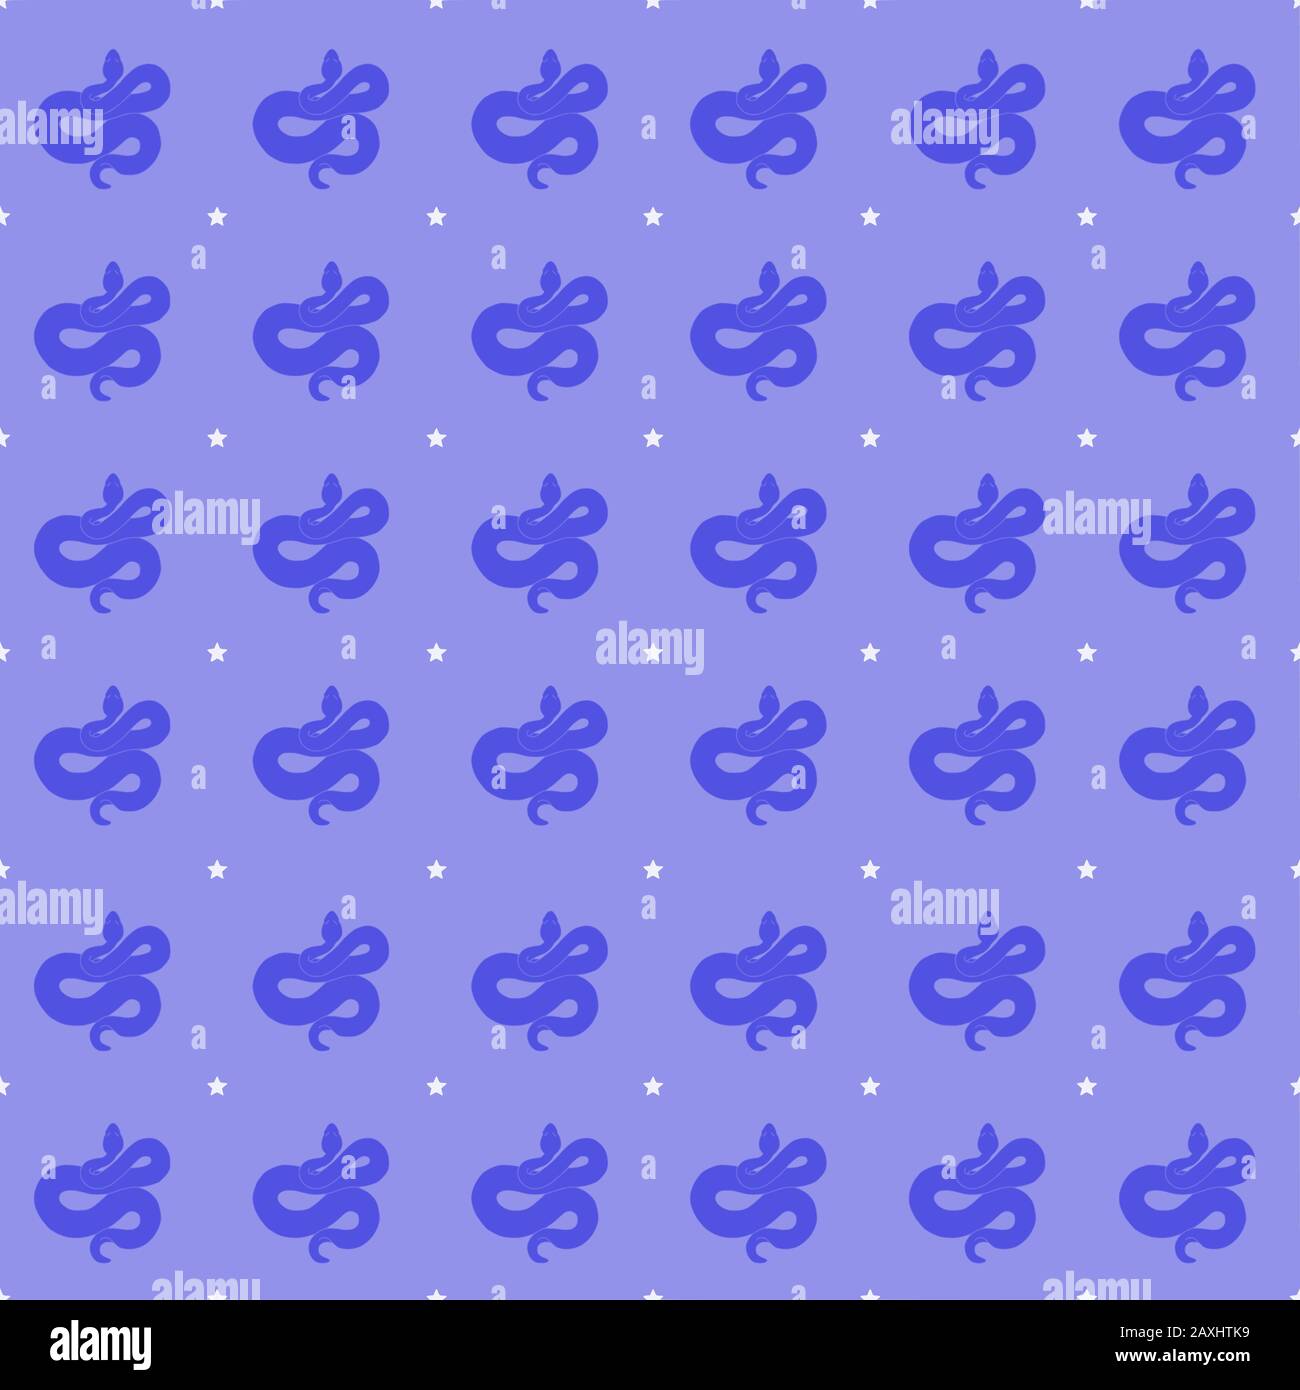 Repeating snake and star pattern. Seamlessly tiles for wallpapers, fabric printing, and embroidery. Purple snakes/white stars on a purple background. Stock Vector